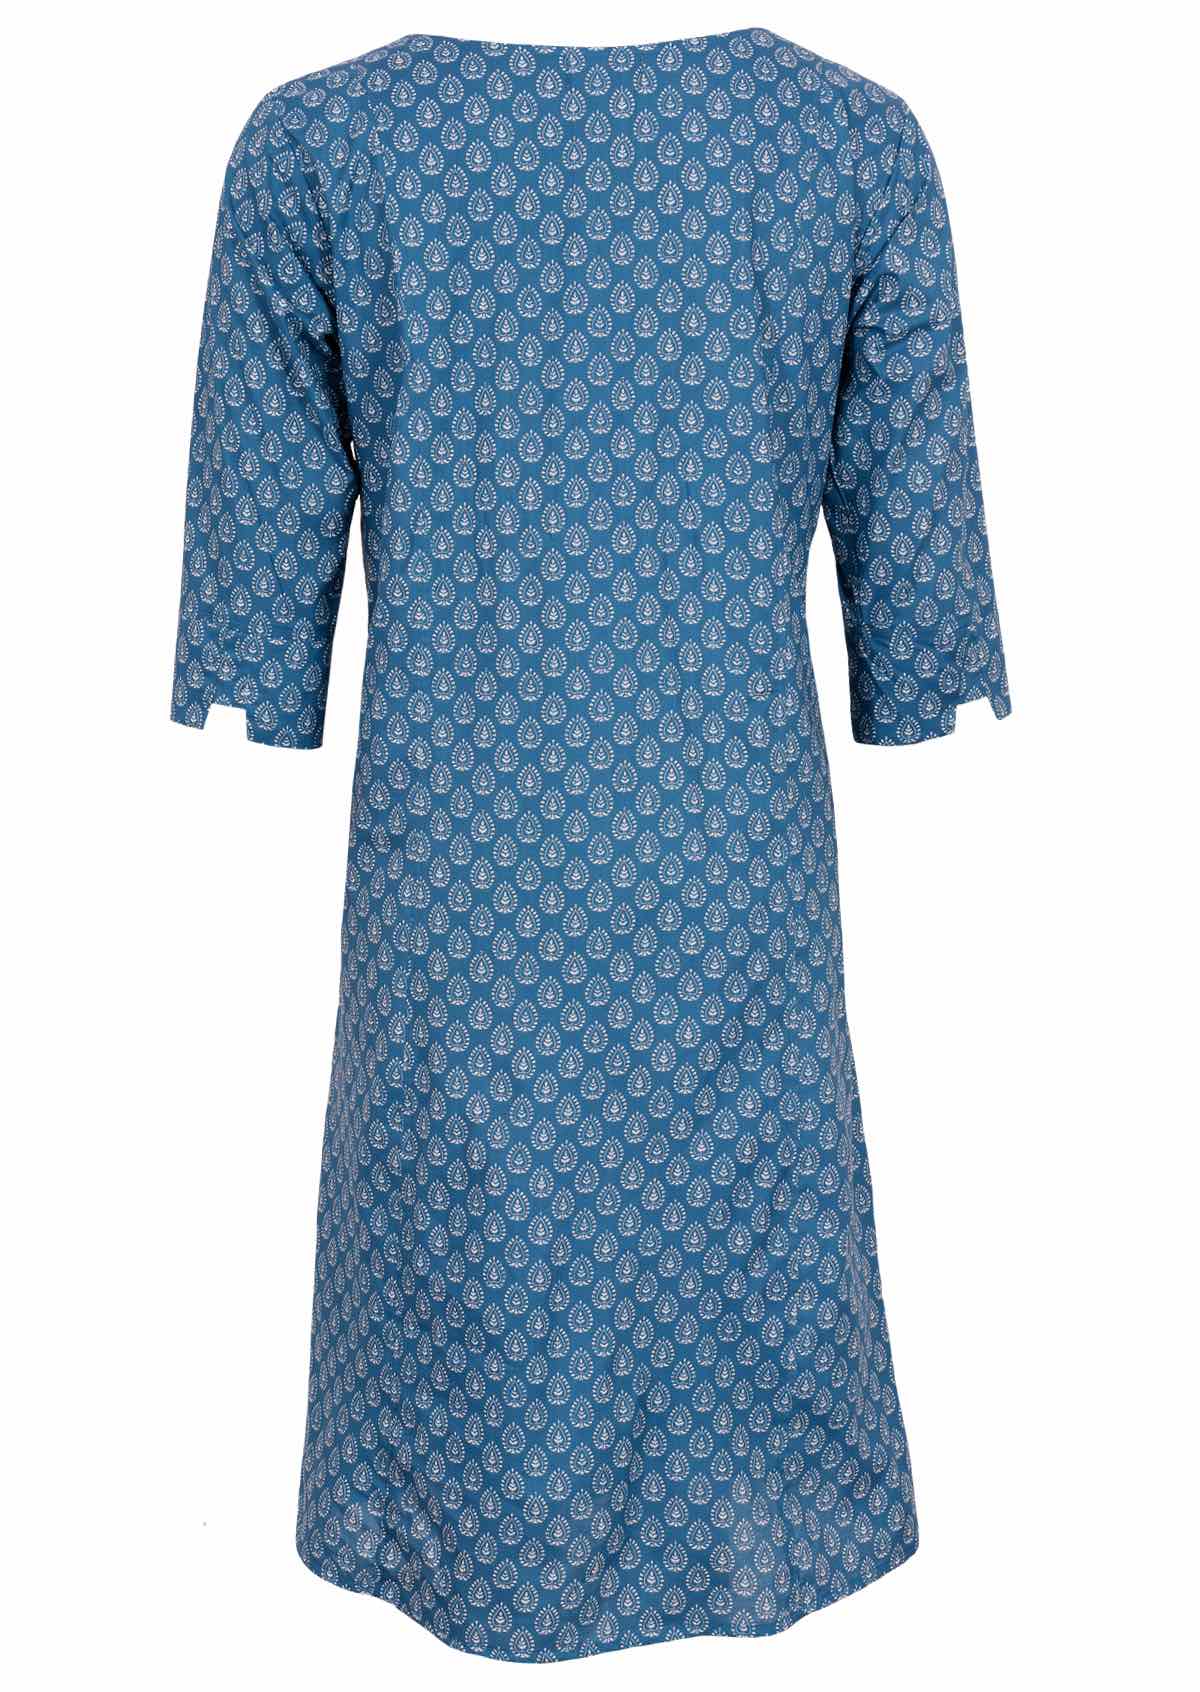 100% cotton loose fitting dress with pin tucks. 